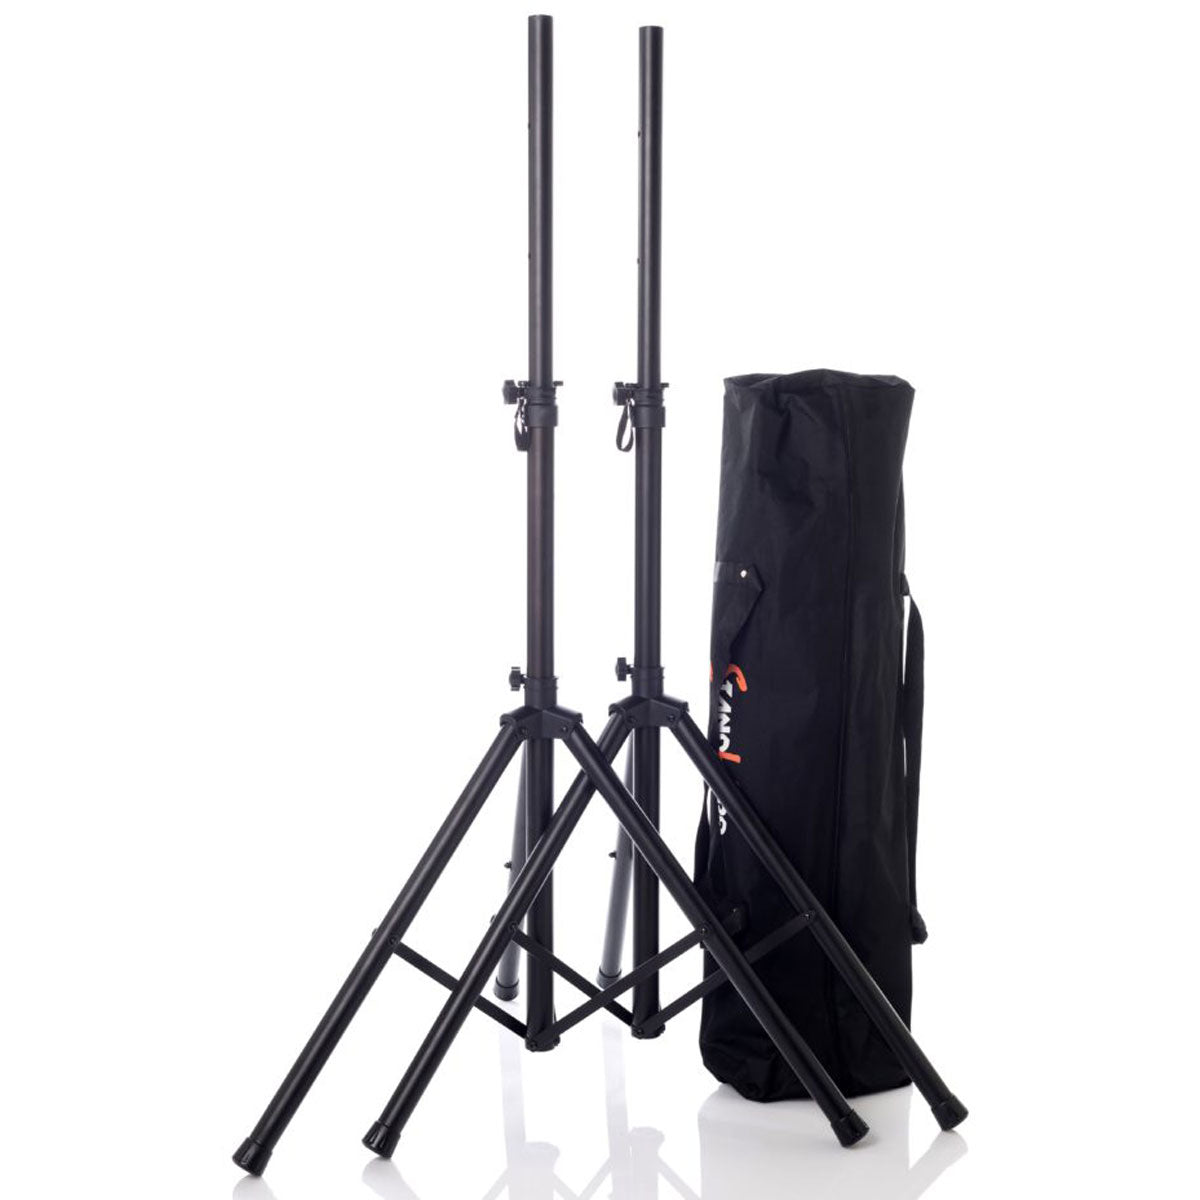 Bespeco SH80N Speaker Stand Pair with Carry Bag